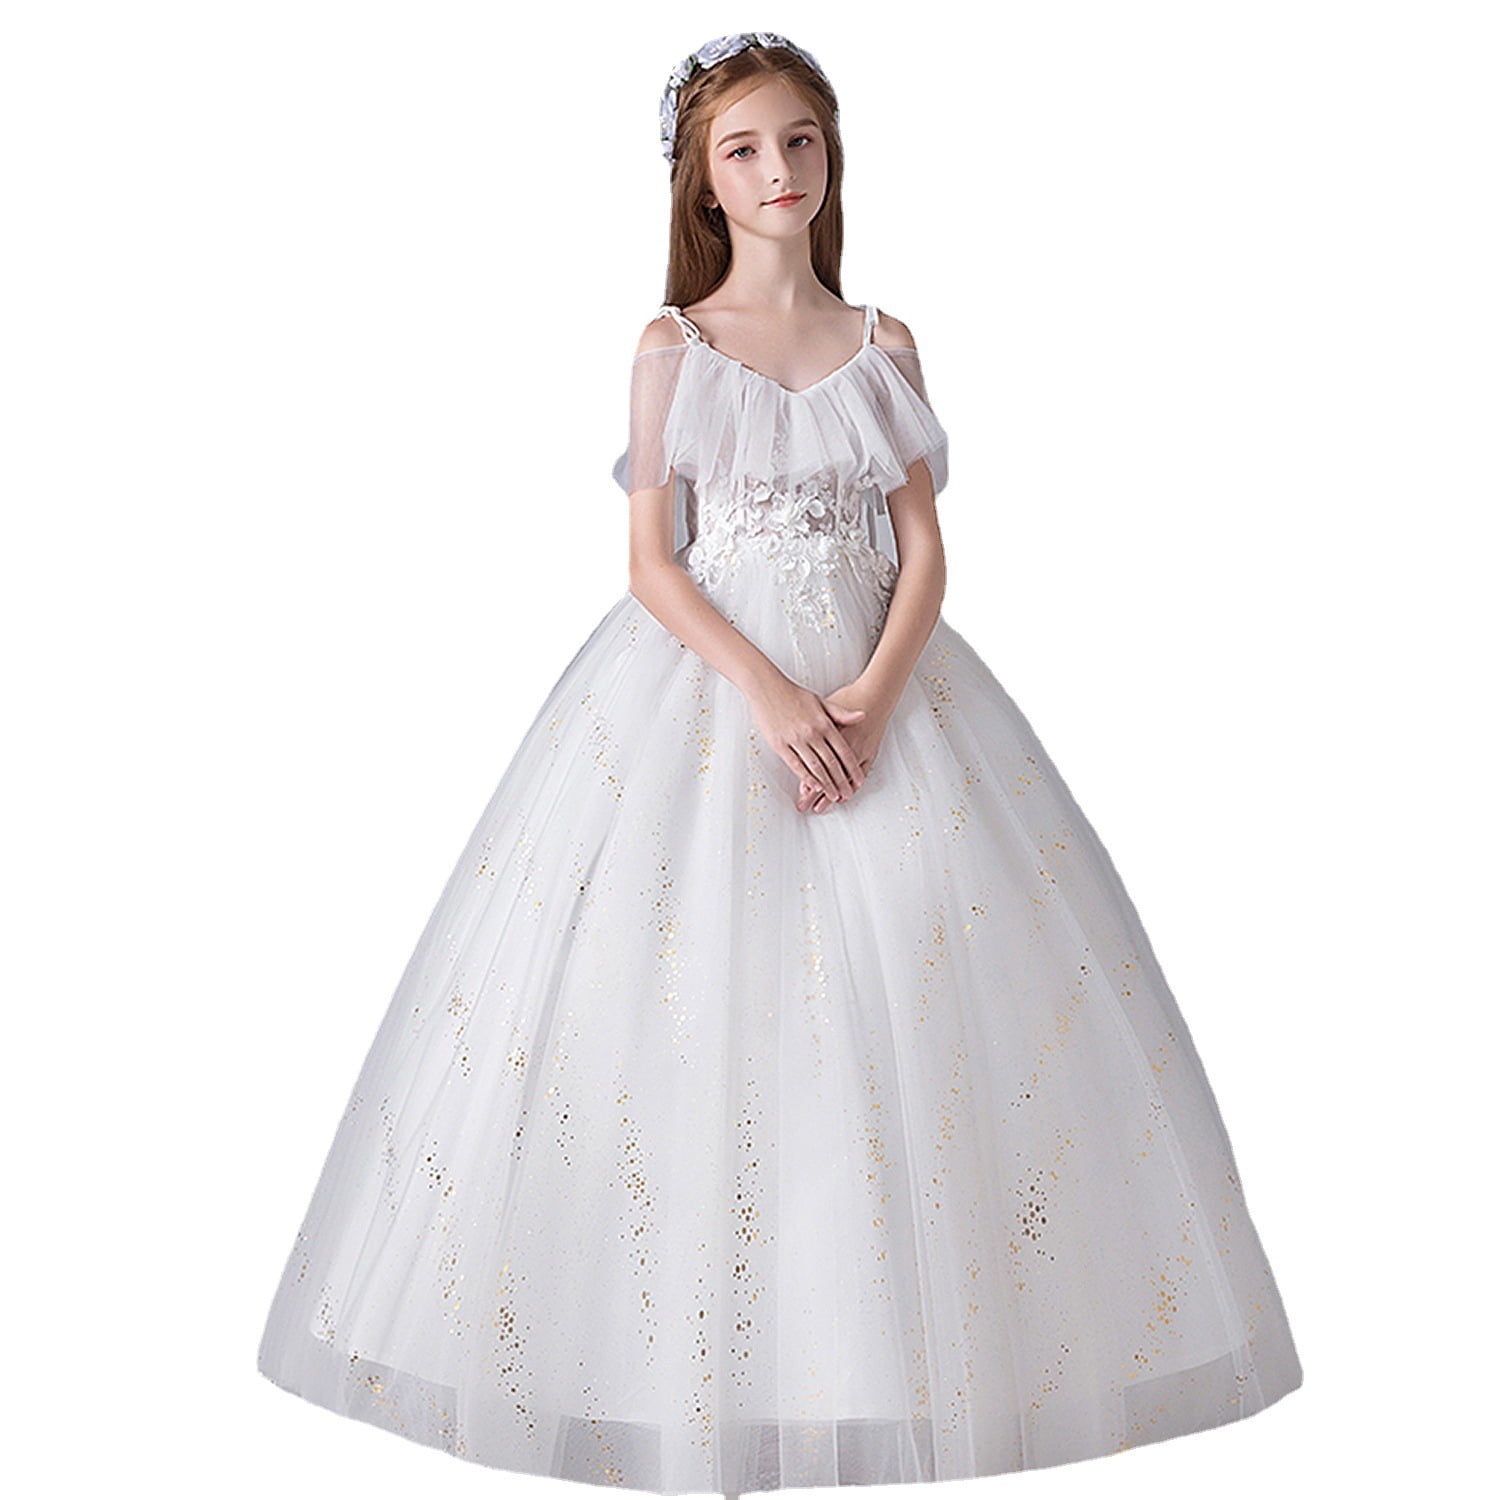 Flower Girl Long Dress for Kids Wedding Bridesmaid Pageant Party Formal ...